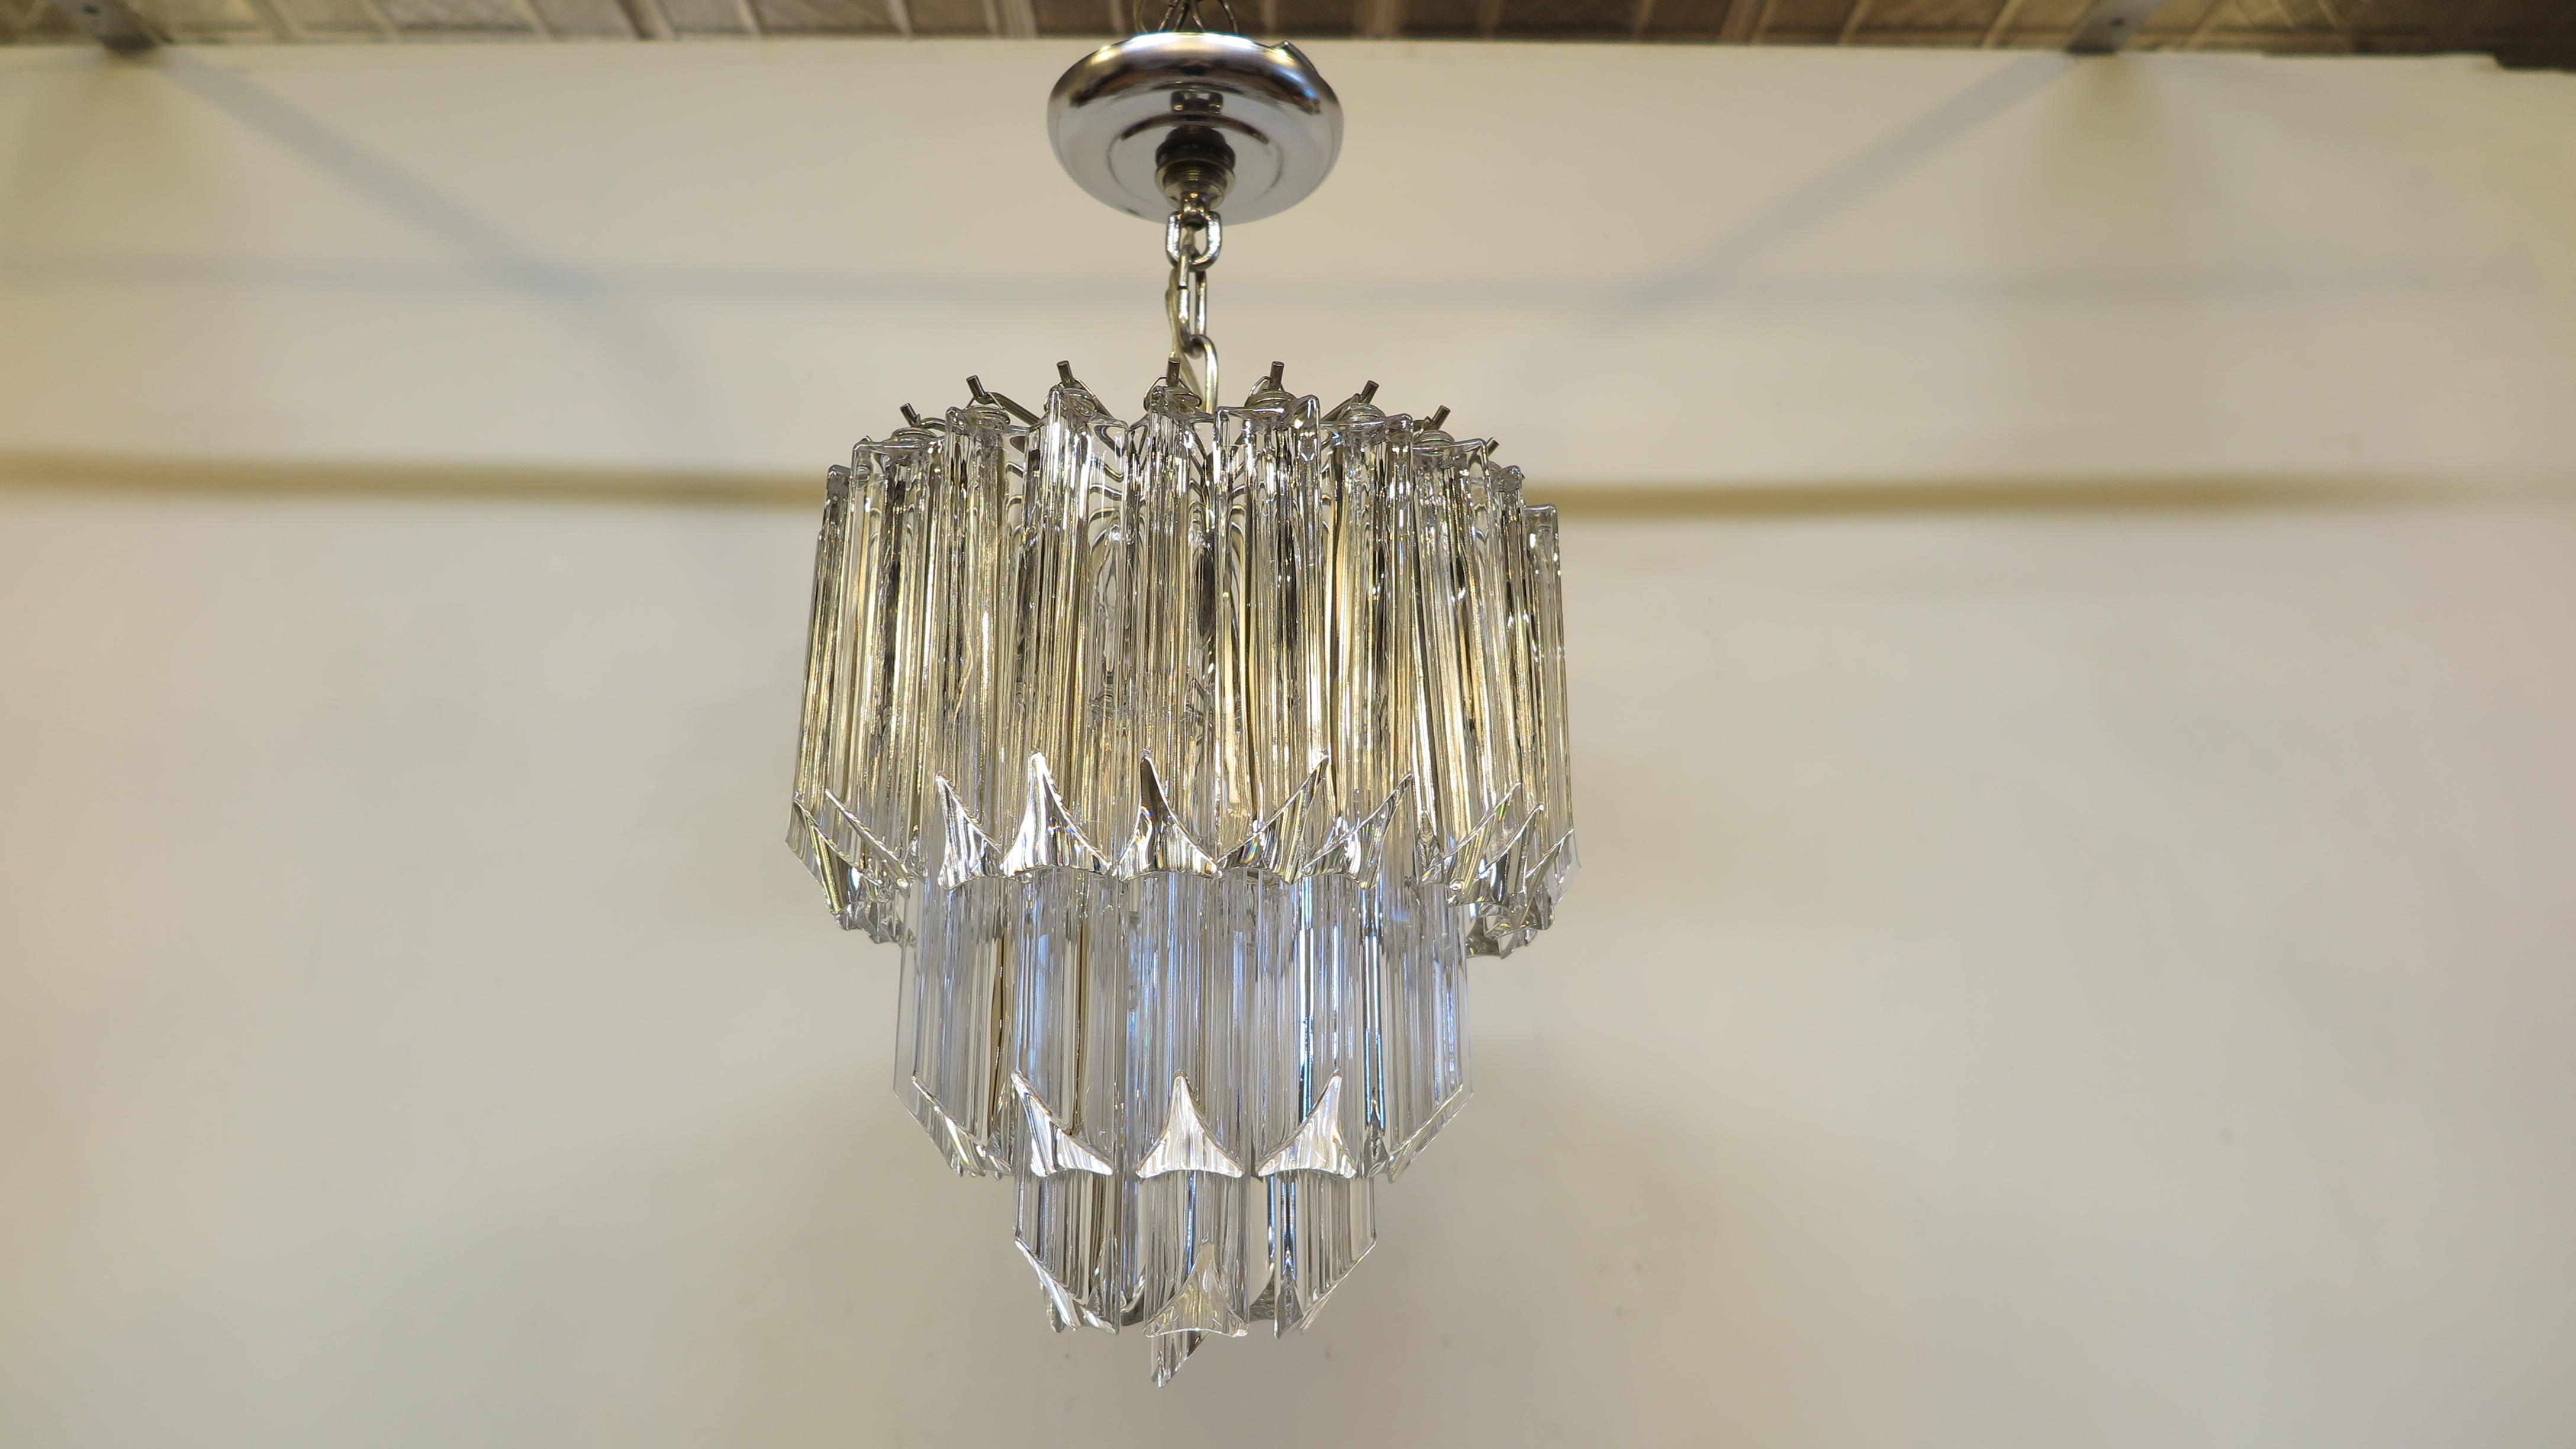 Beautiful glass prism chandelier in the style of Venini, circa 1970s. Having 3 tiers of hangers with 43 surrounding triedri glass prisms. Hanger frame is in nickel with 3 candelabra sockets. Of very good quality in good condition. Four glass prisms